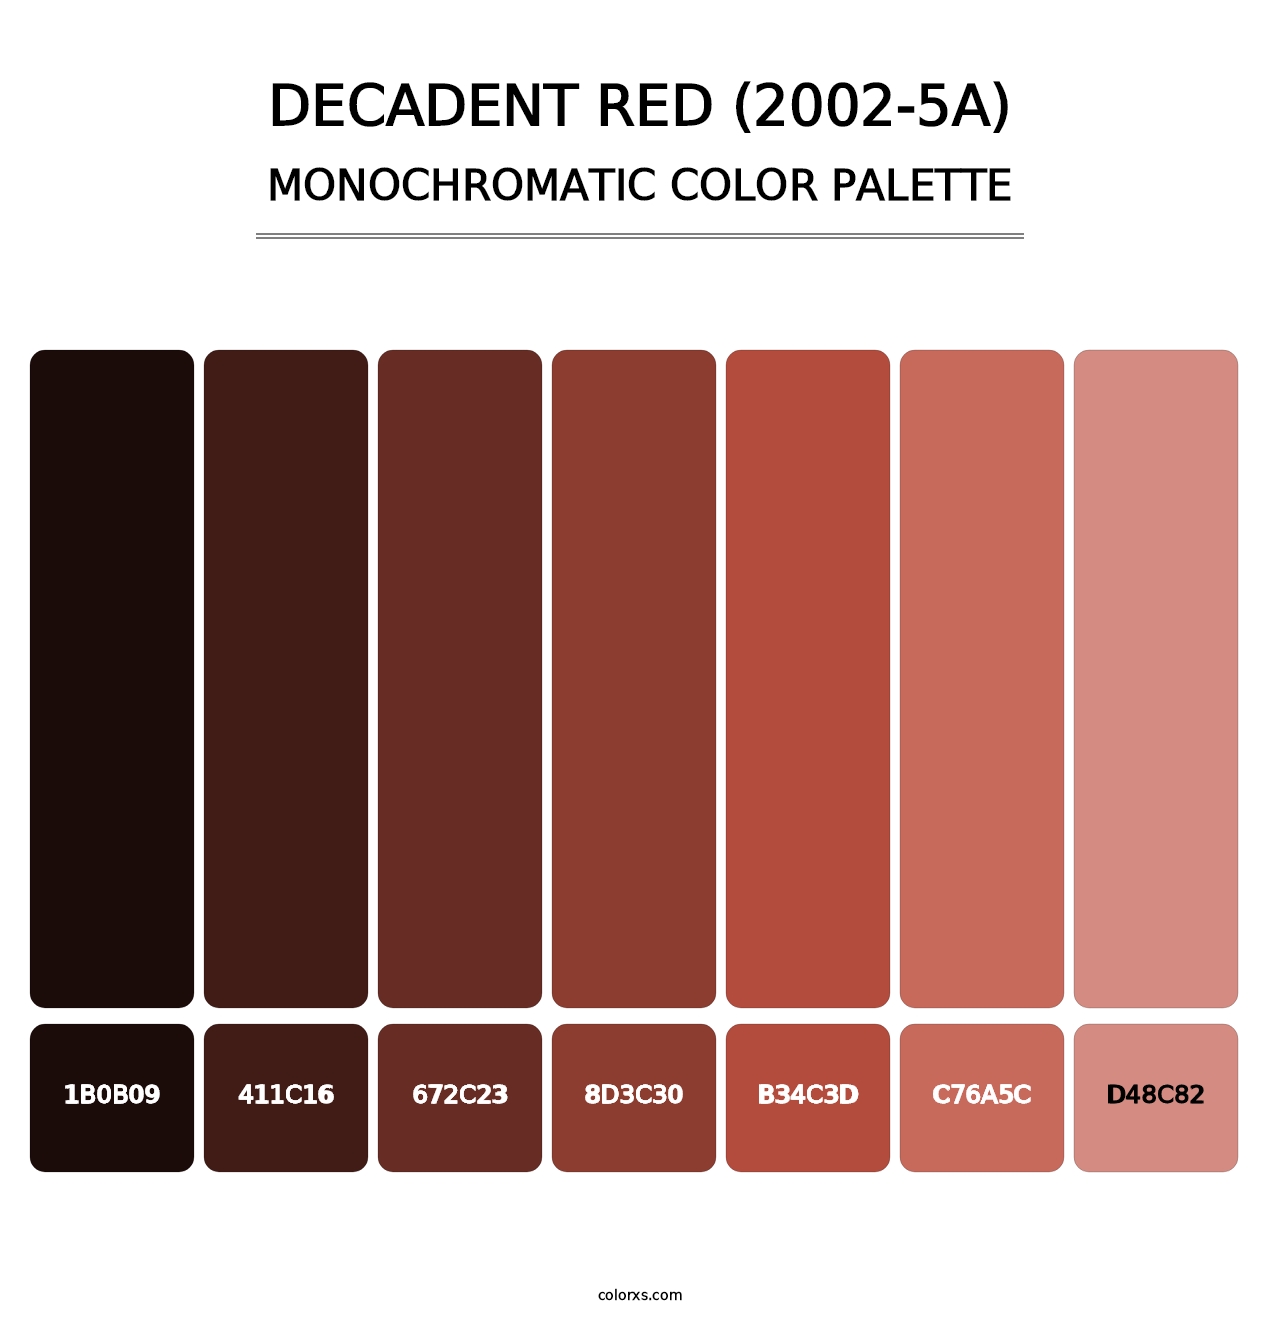 Decadent Red (2002-5A) - Monochromatic Color Palette